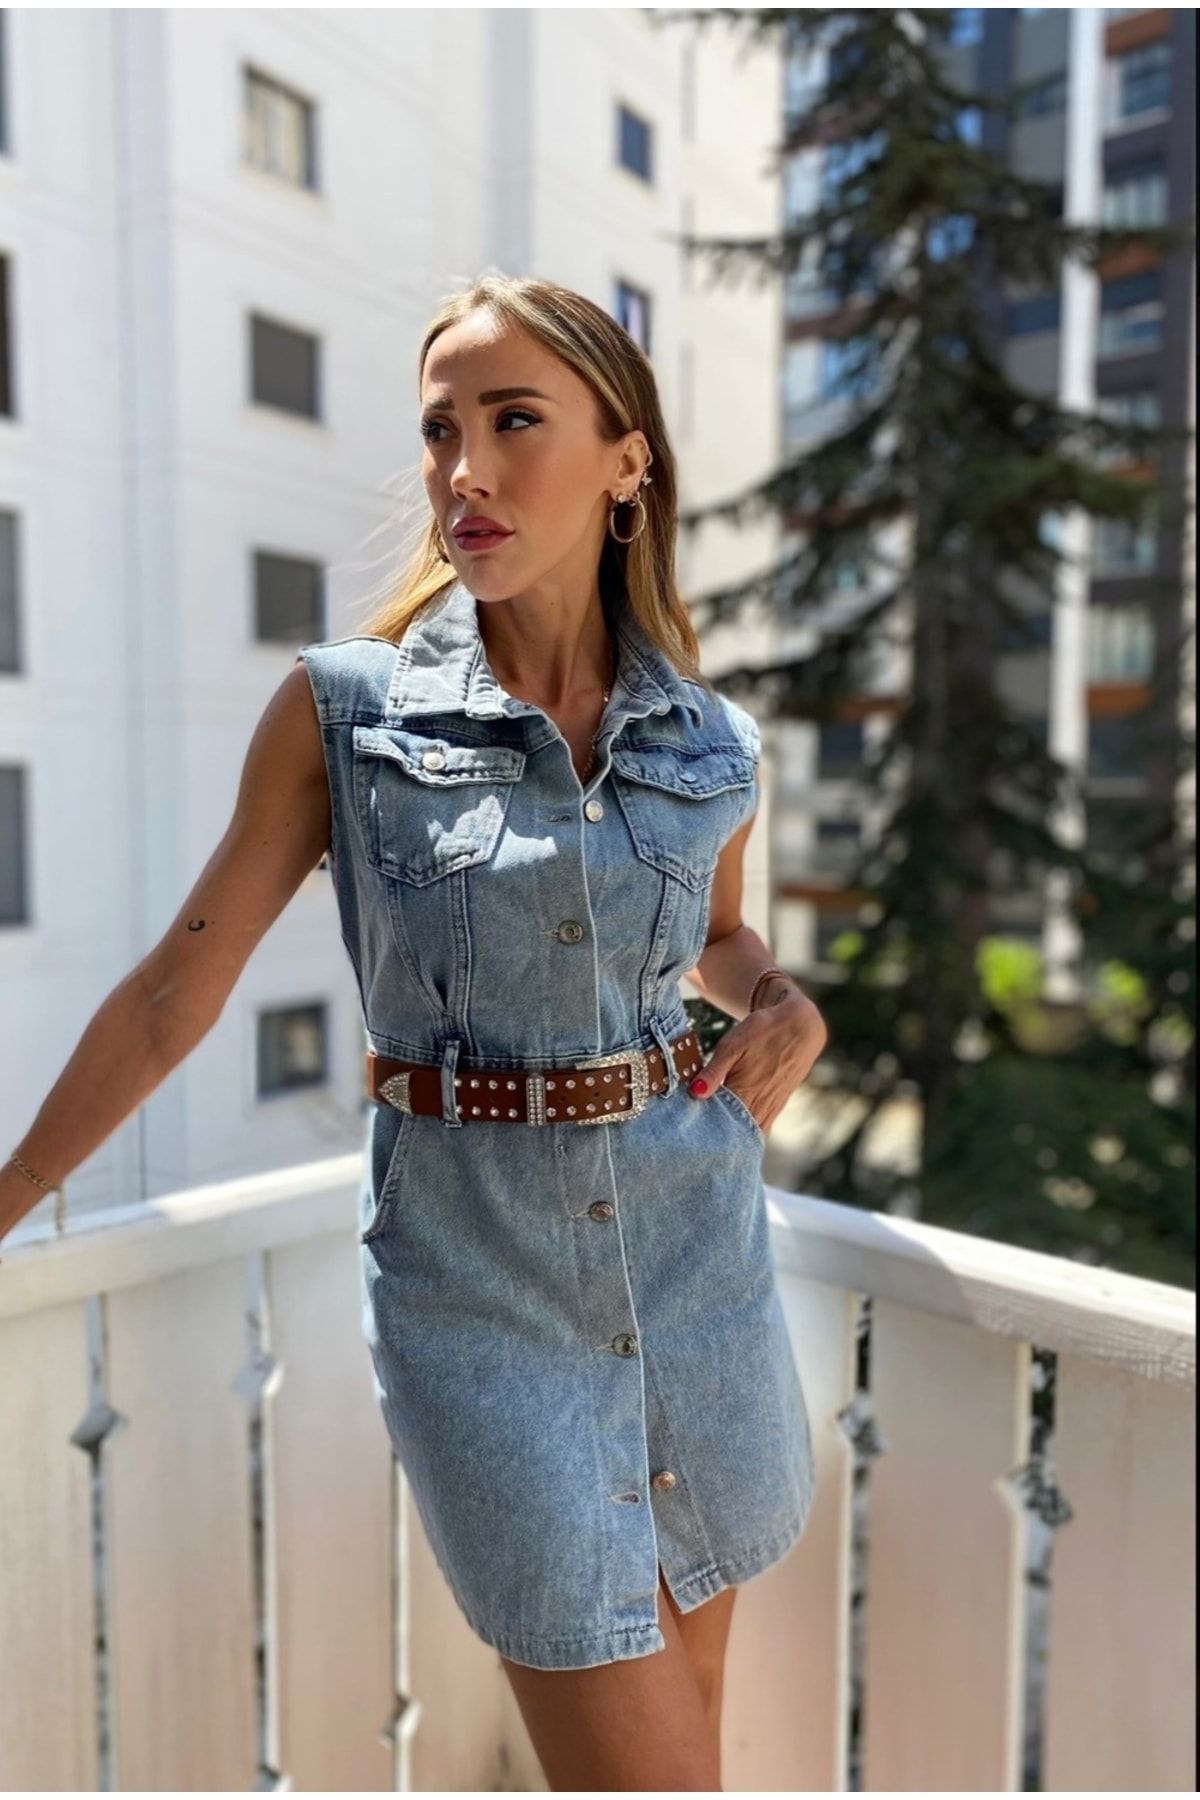 Denim Days-casual style, street style, women clothes, moda mujer | Denim  outfit, Outfits, Denim dress outfit winter